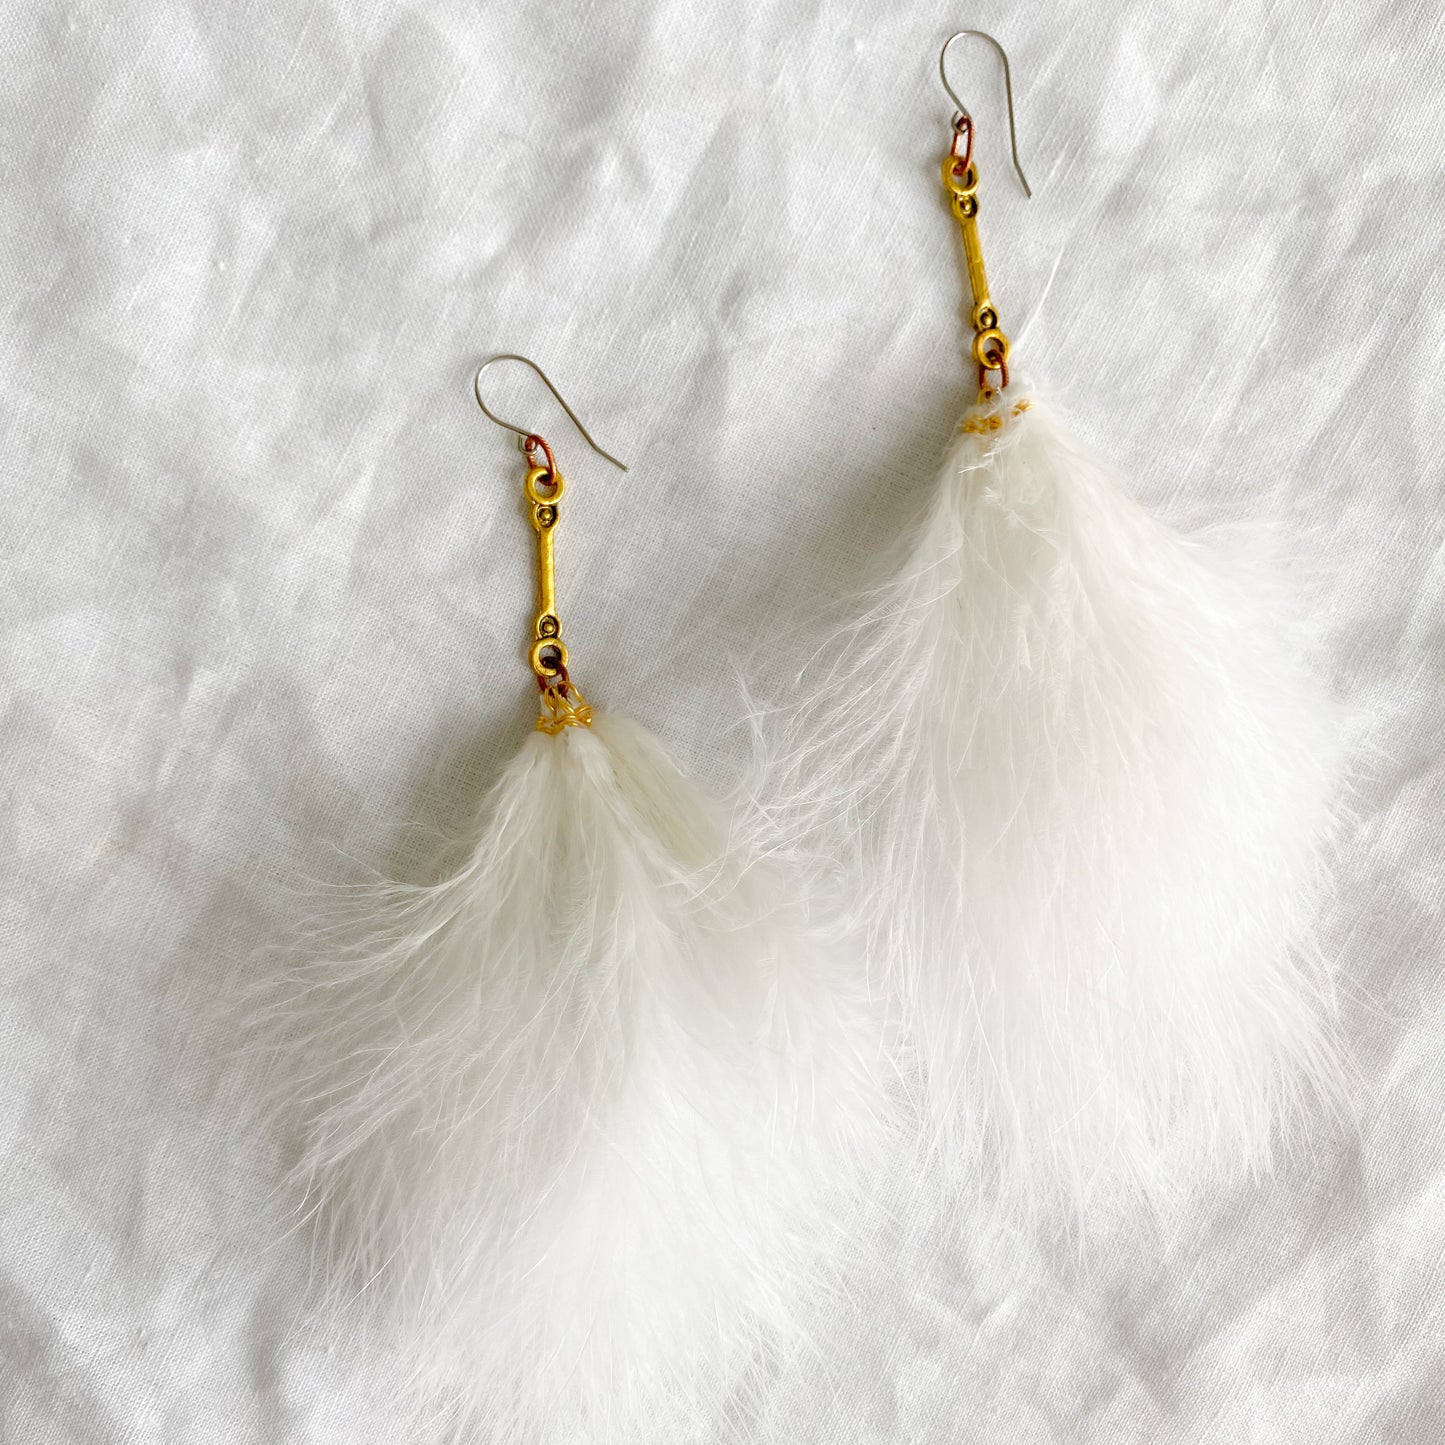 Bellestyle doheny earrings white maribou feather long